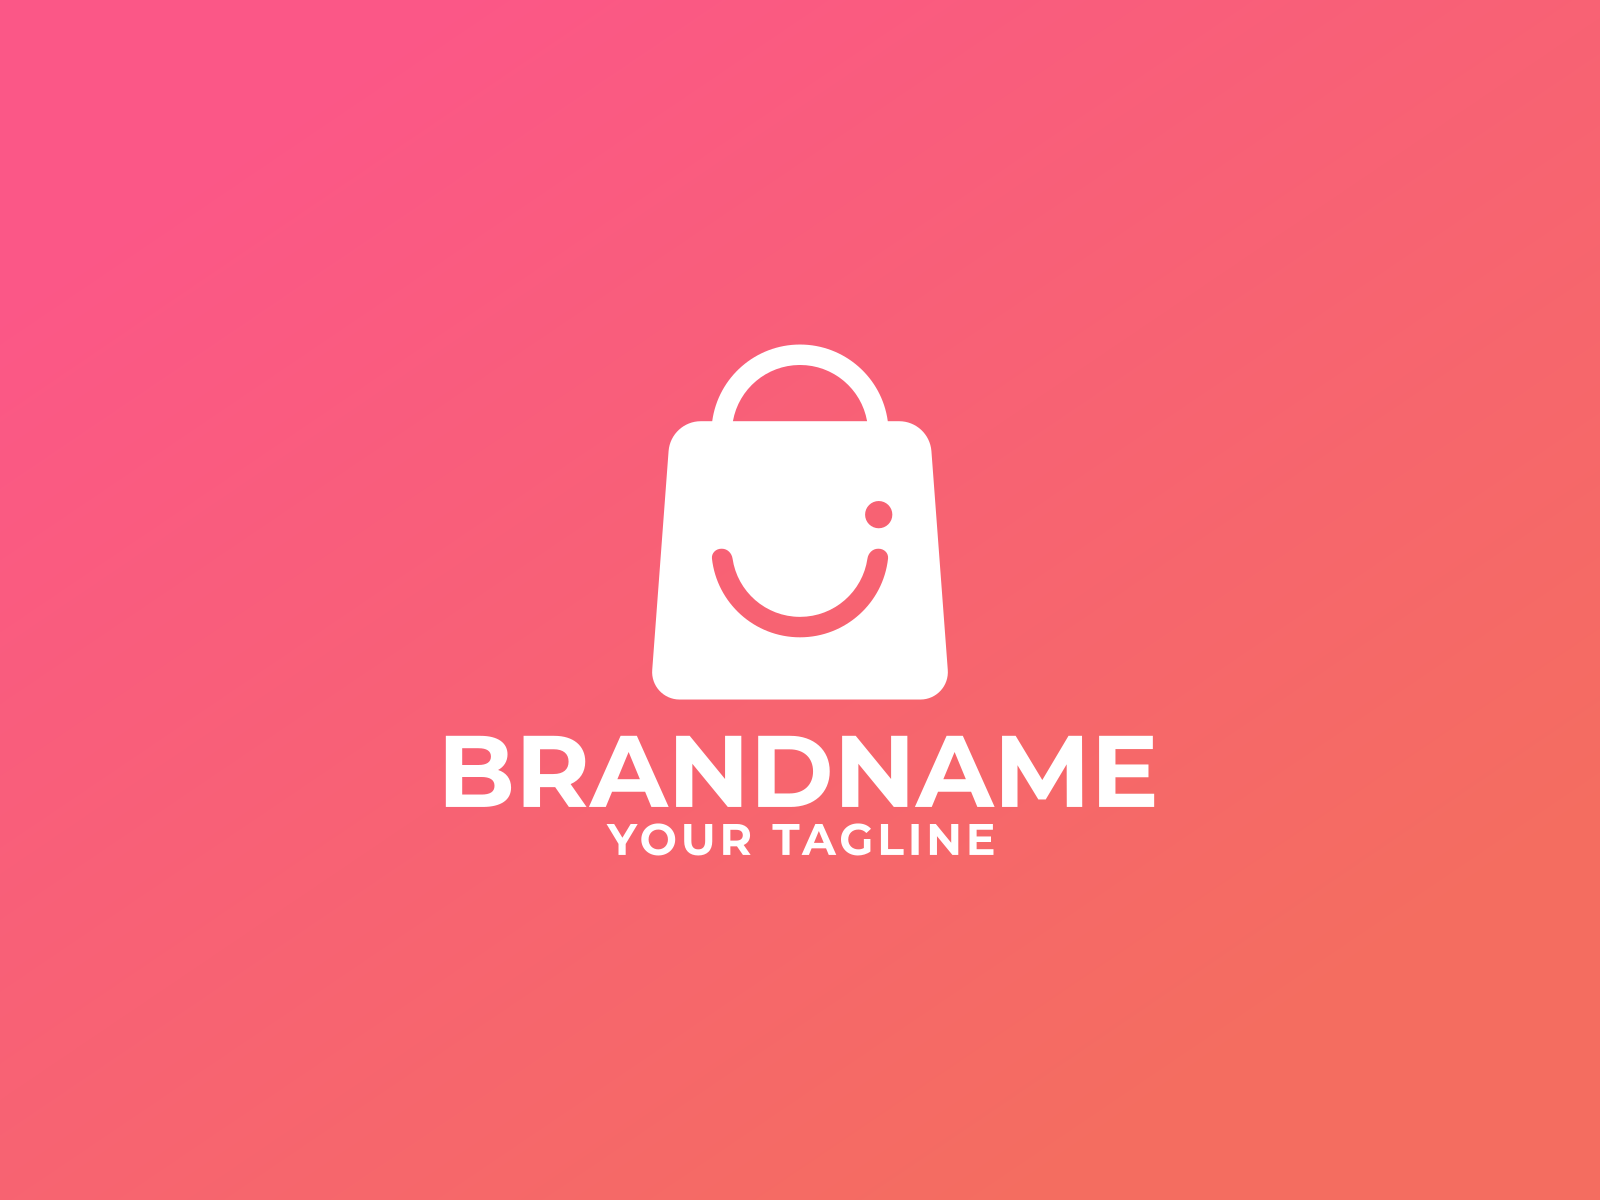 Page 3 - Customize 264+ Ecommerce Logo Templates Online - Canva